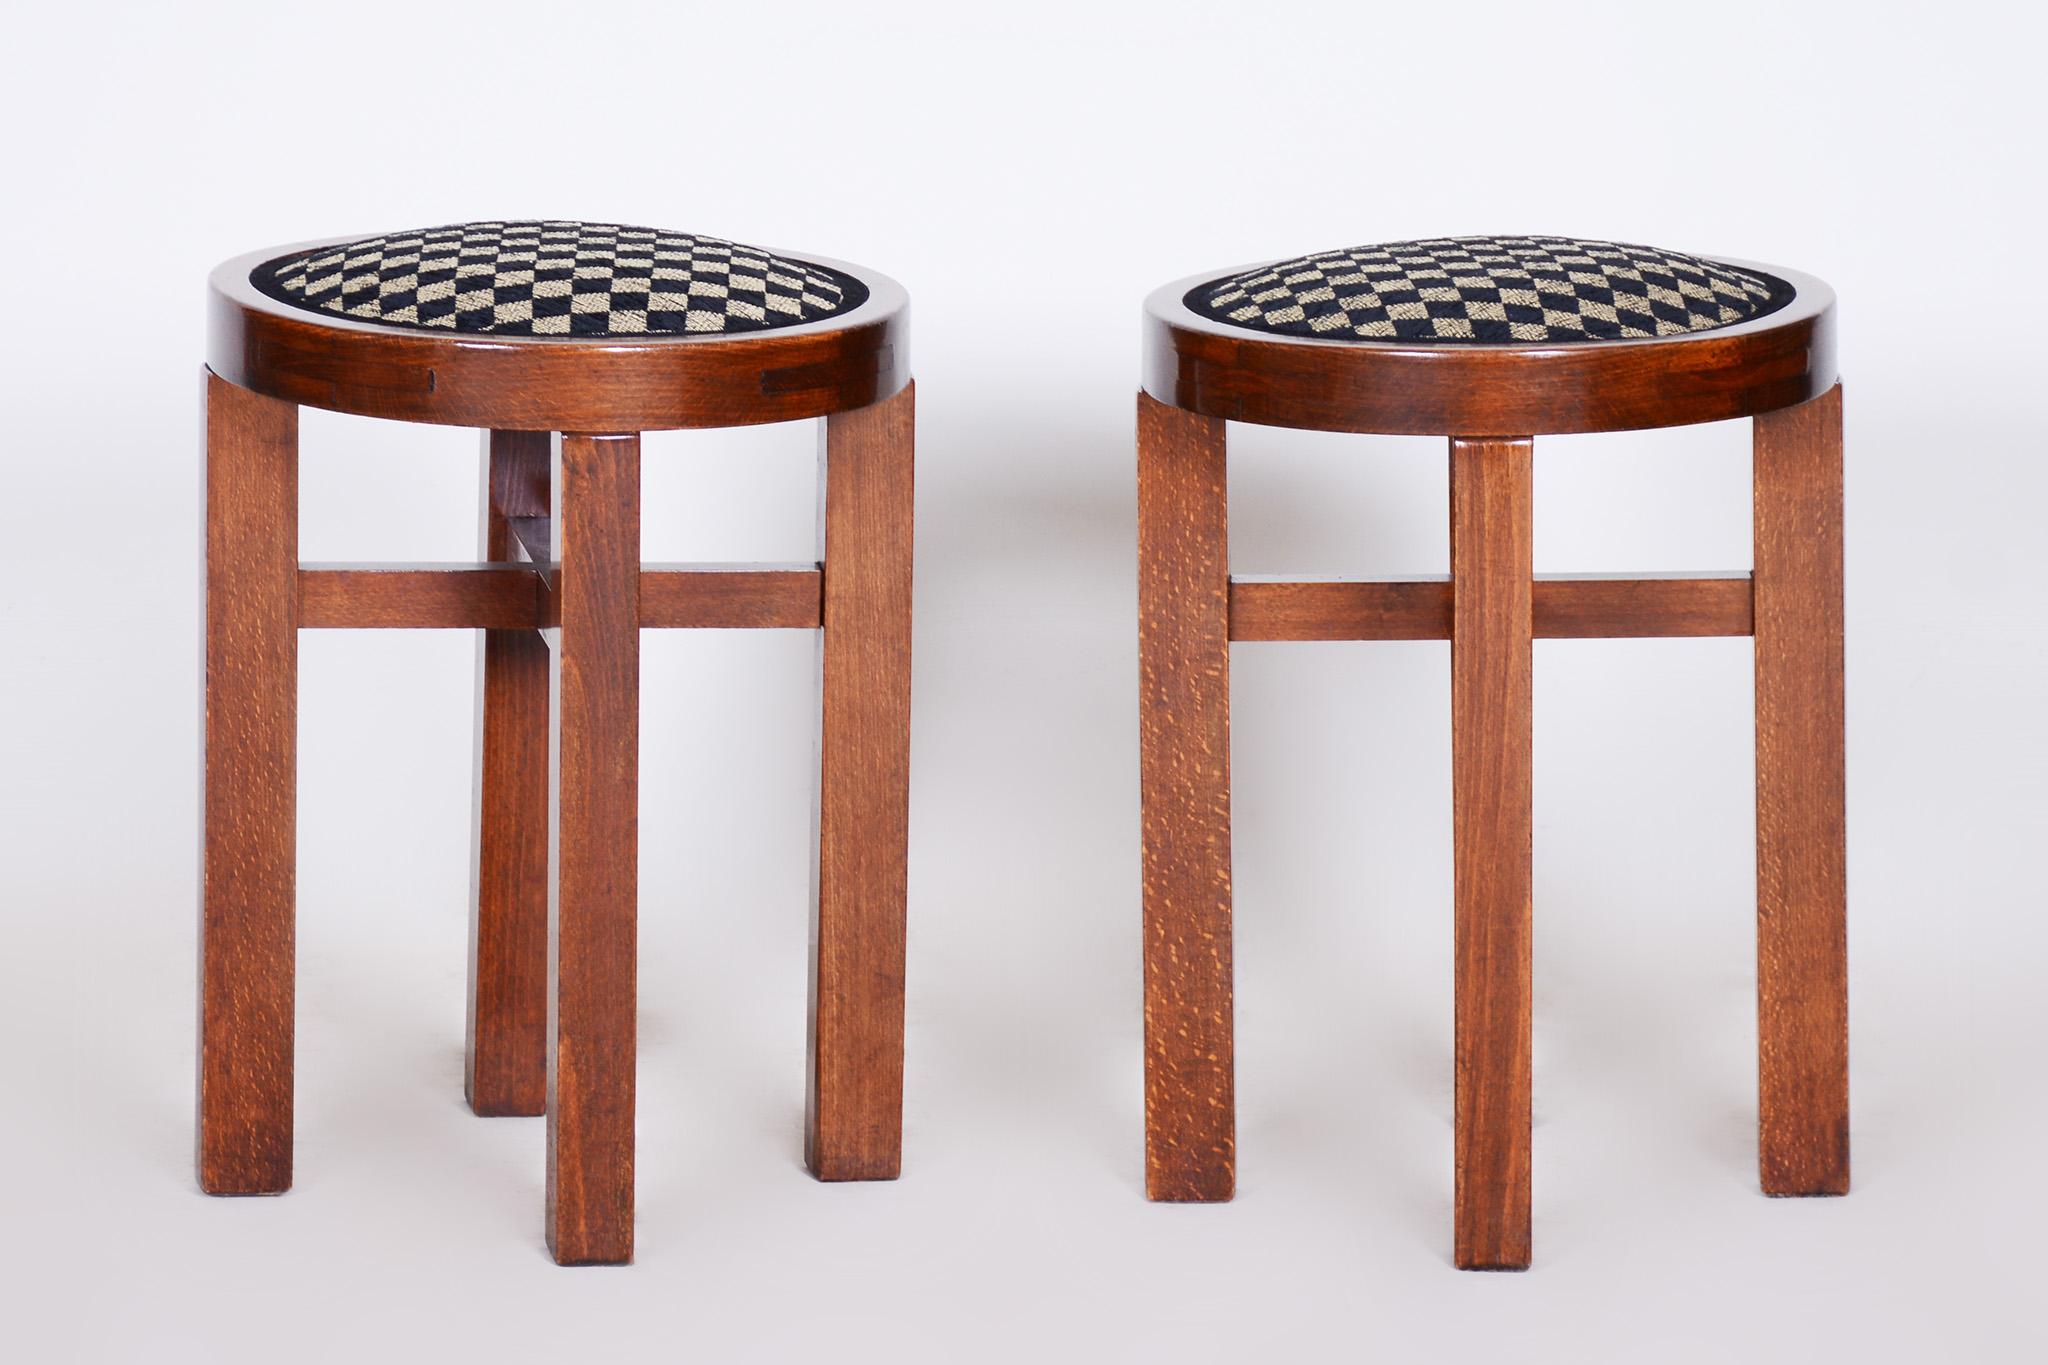 Set of 3 ArtDeco Foot Stools Made in´20s Czechia, New upholstery, Revived polish For Sale 5